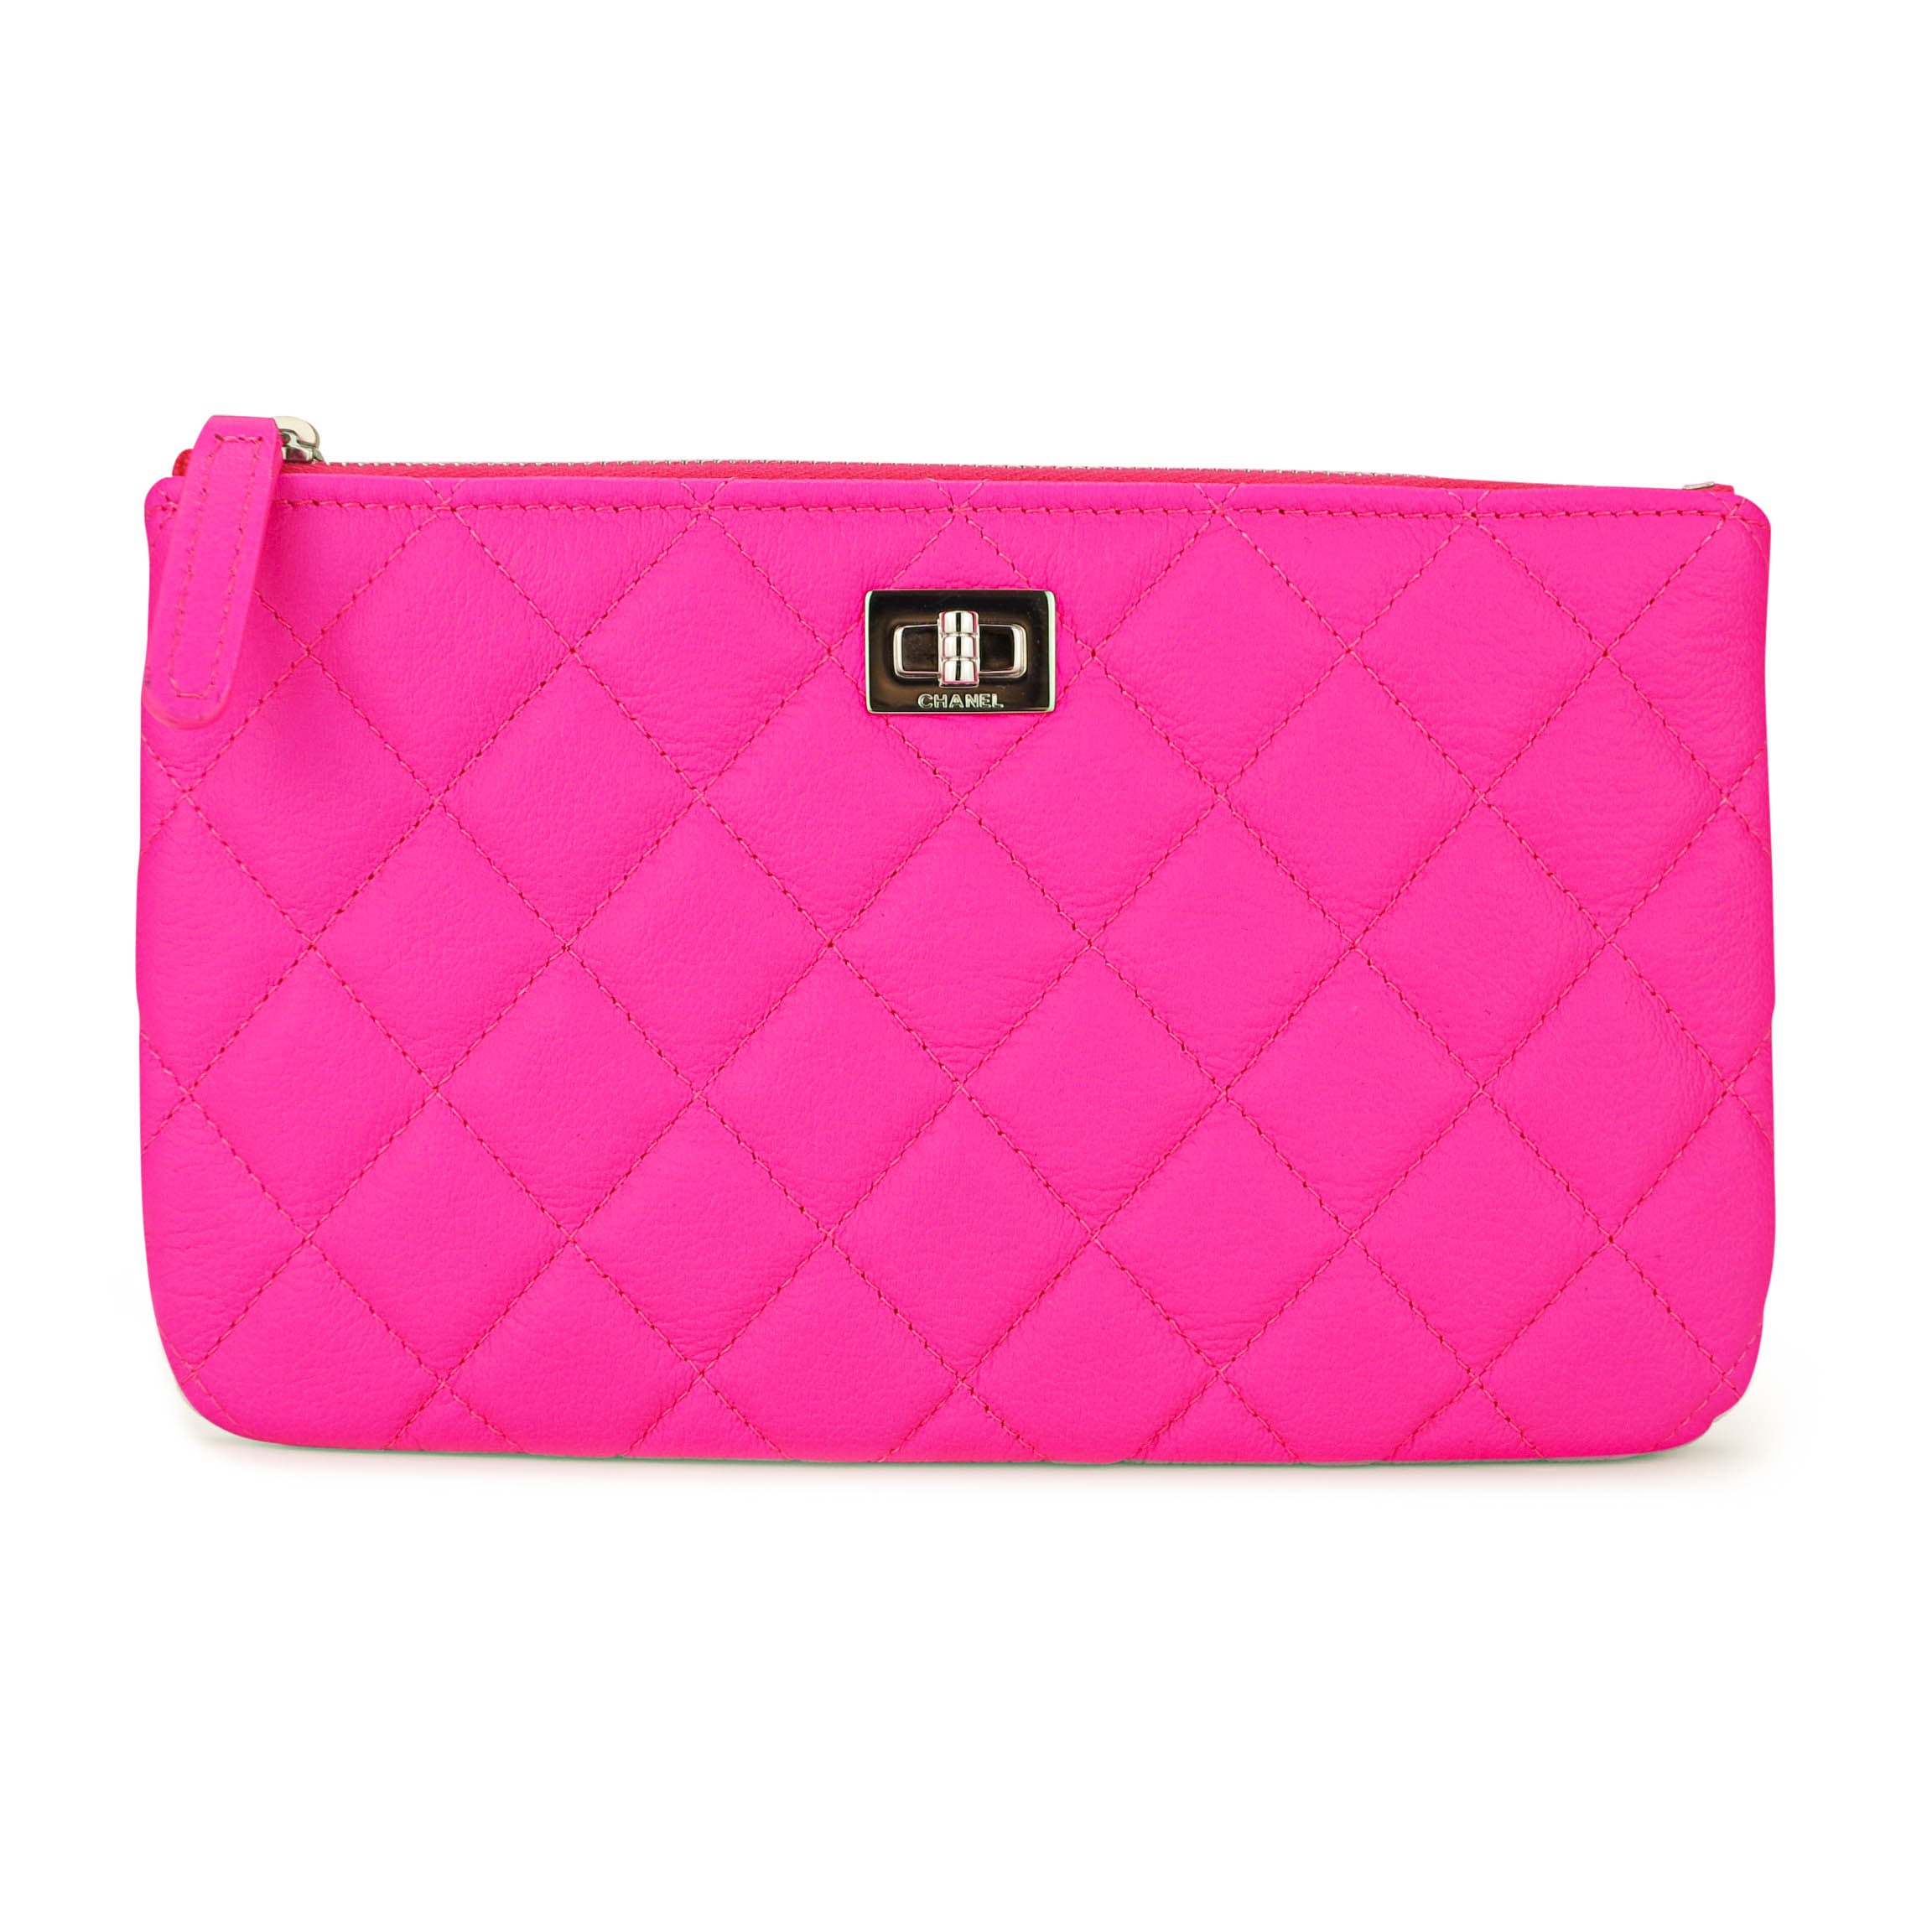 Small O Case Pouch in Neon Pink Calfskin